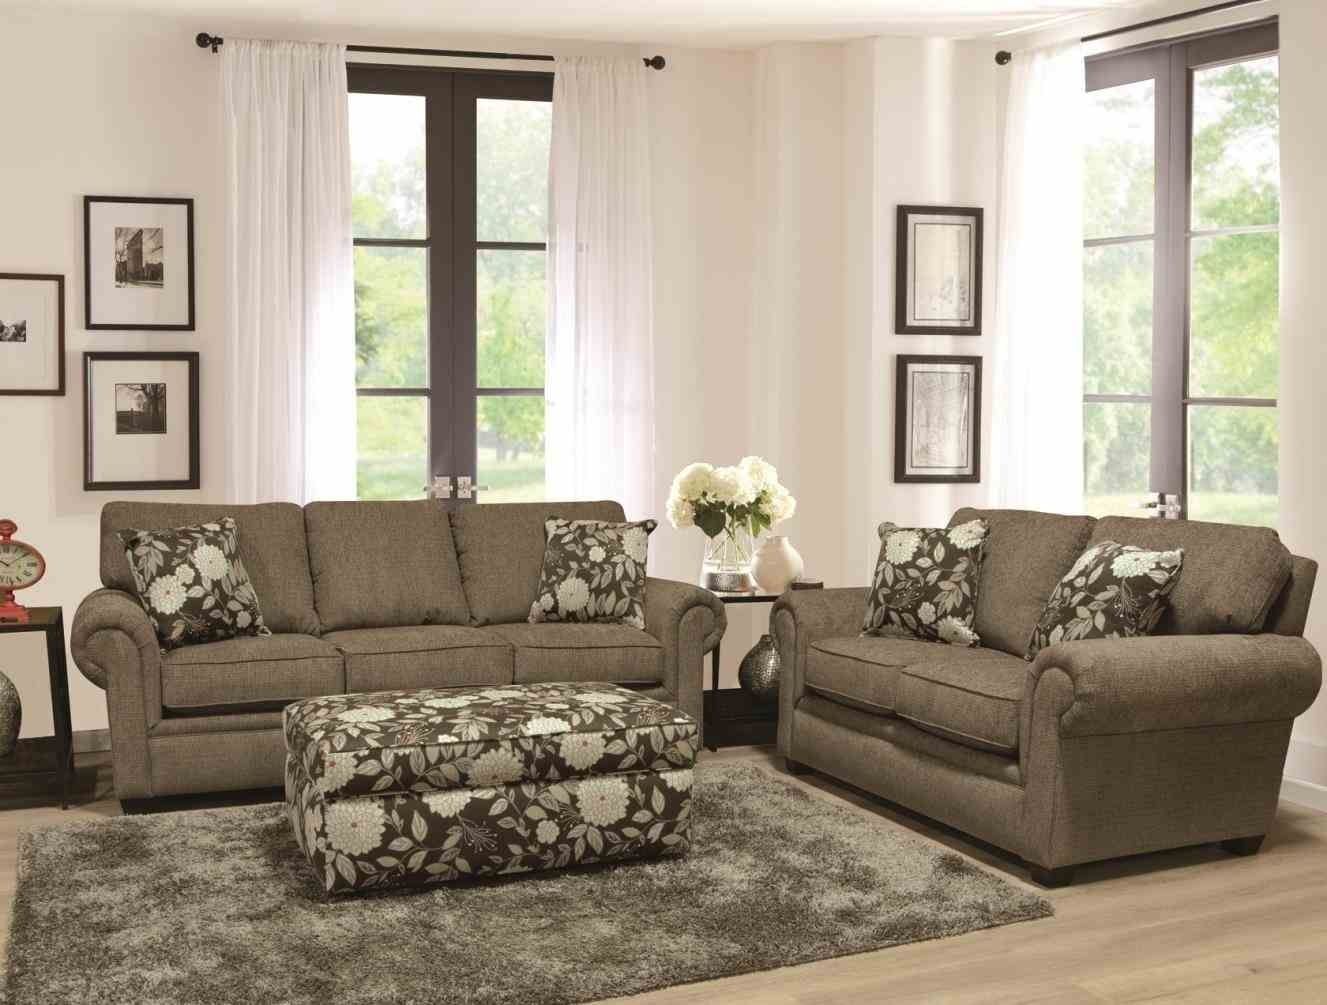 Justin Salem Meyer Des Moines Iowa Wedding And Fabric Sectional Throughout Des Moines Ia Sectional Sofas (Photo 9 of 10)